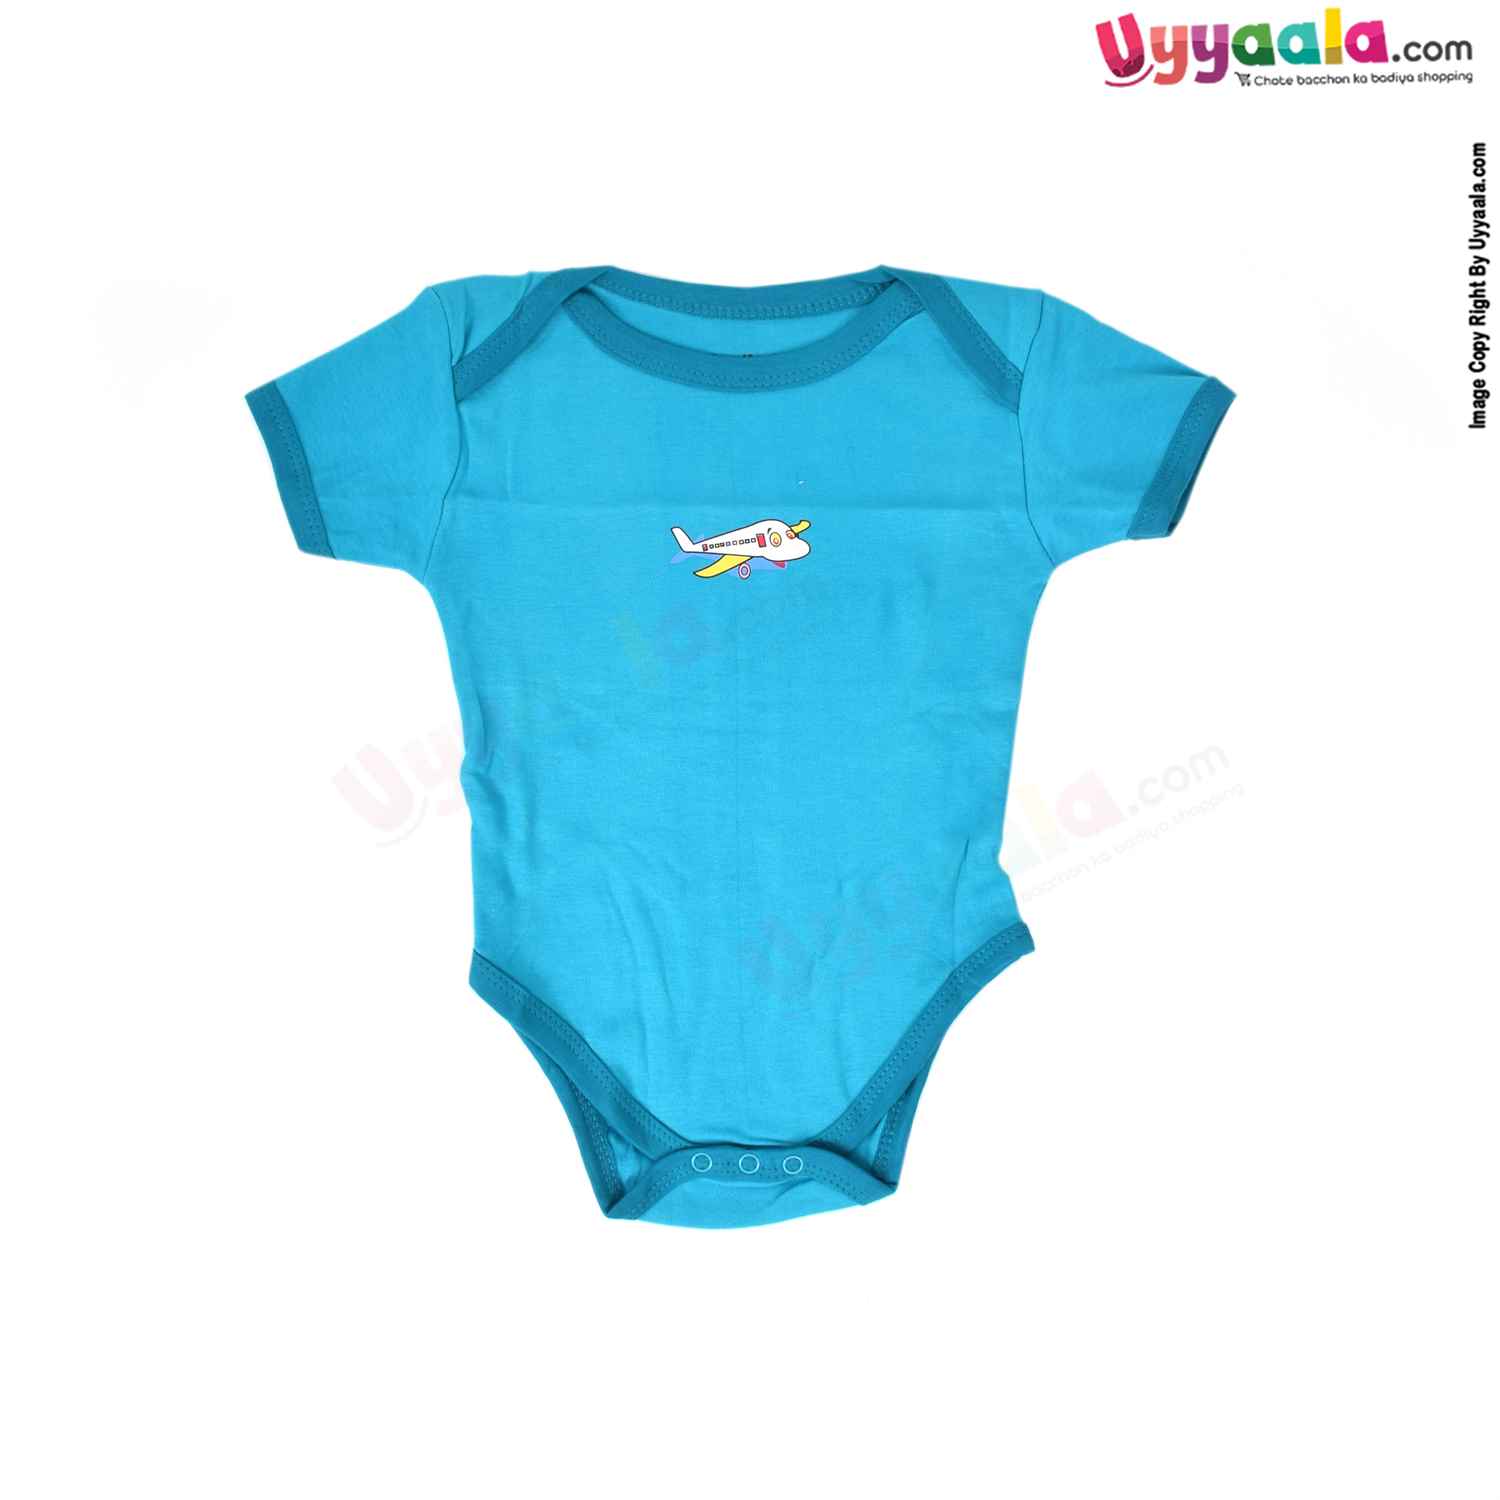 Precious One Short Sleeve Body Suit 100% Soft Hosiery Cotton - Green with Aeroplane Print (6-9M)